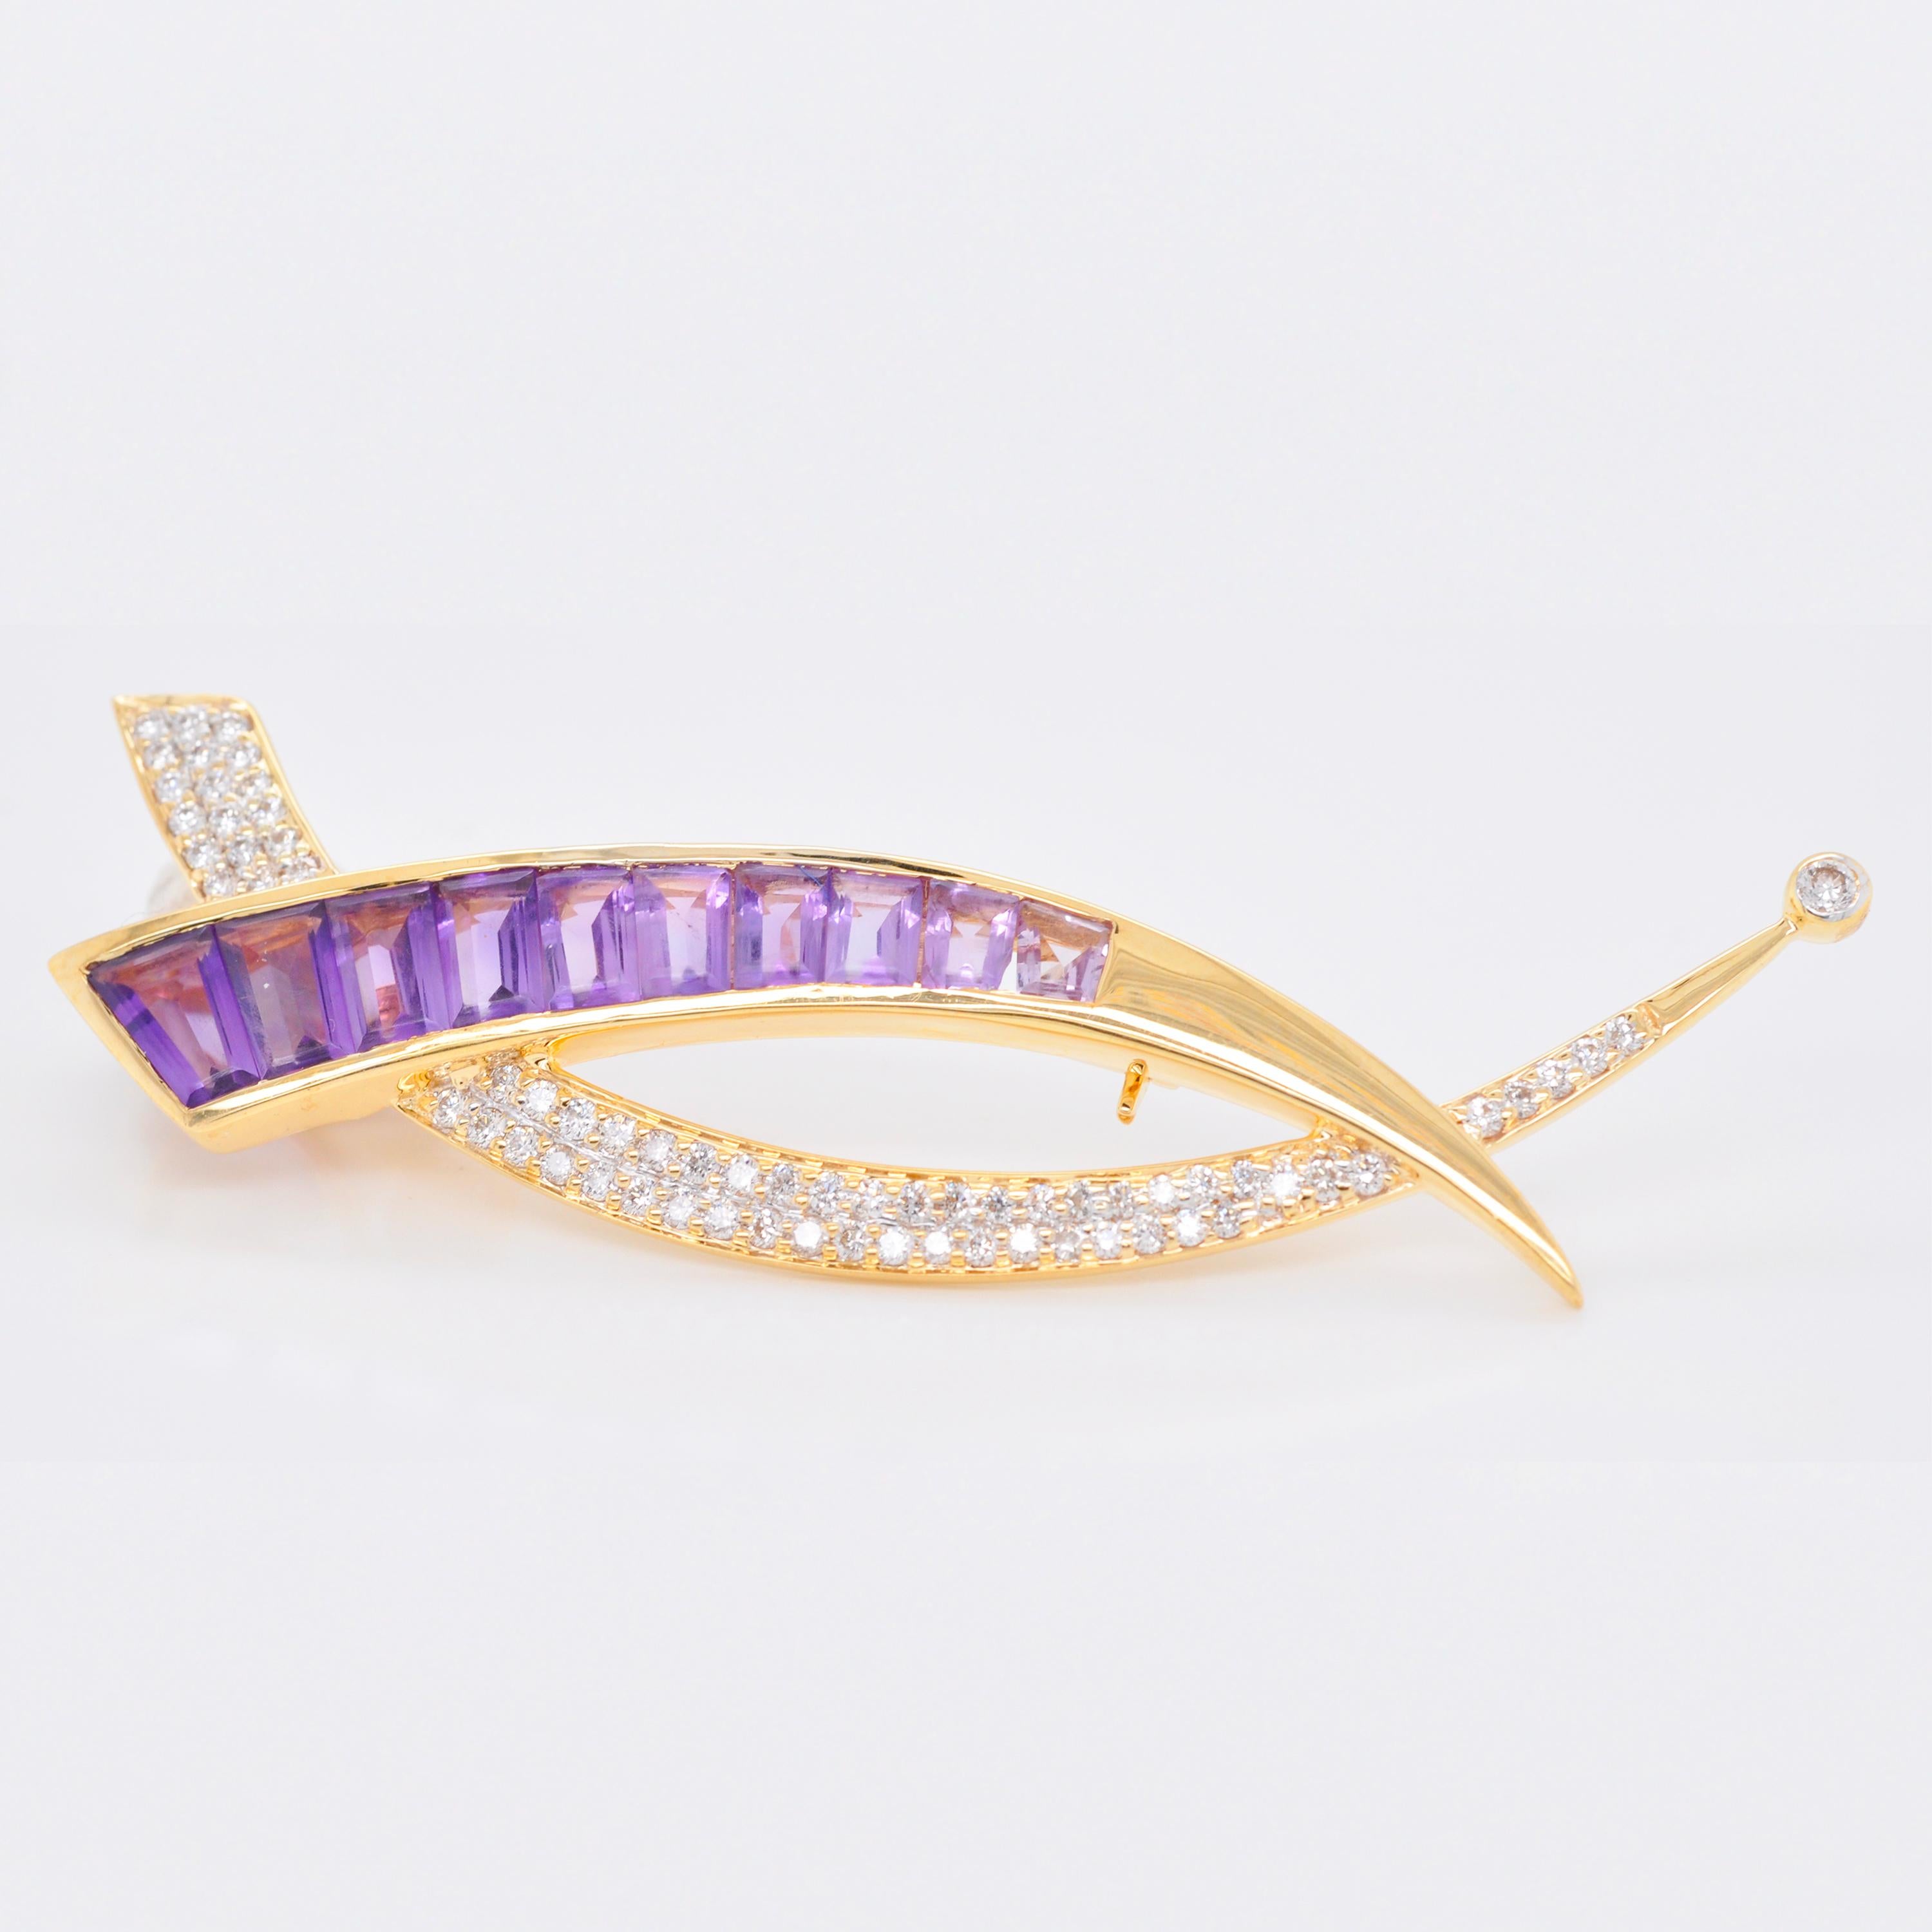 18 Karat Gold Calibre Cut Baguette Amethyst Diamond Brooch Pendant In New Condition For Sale In Jaipur, Rajasthan